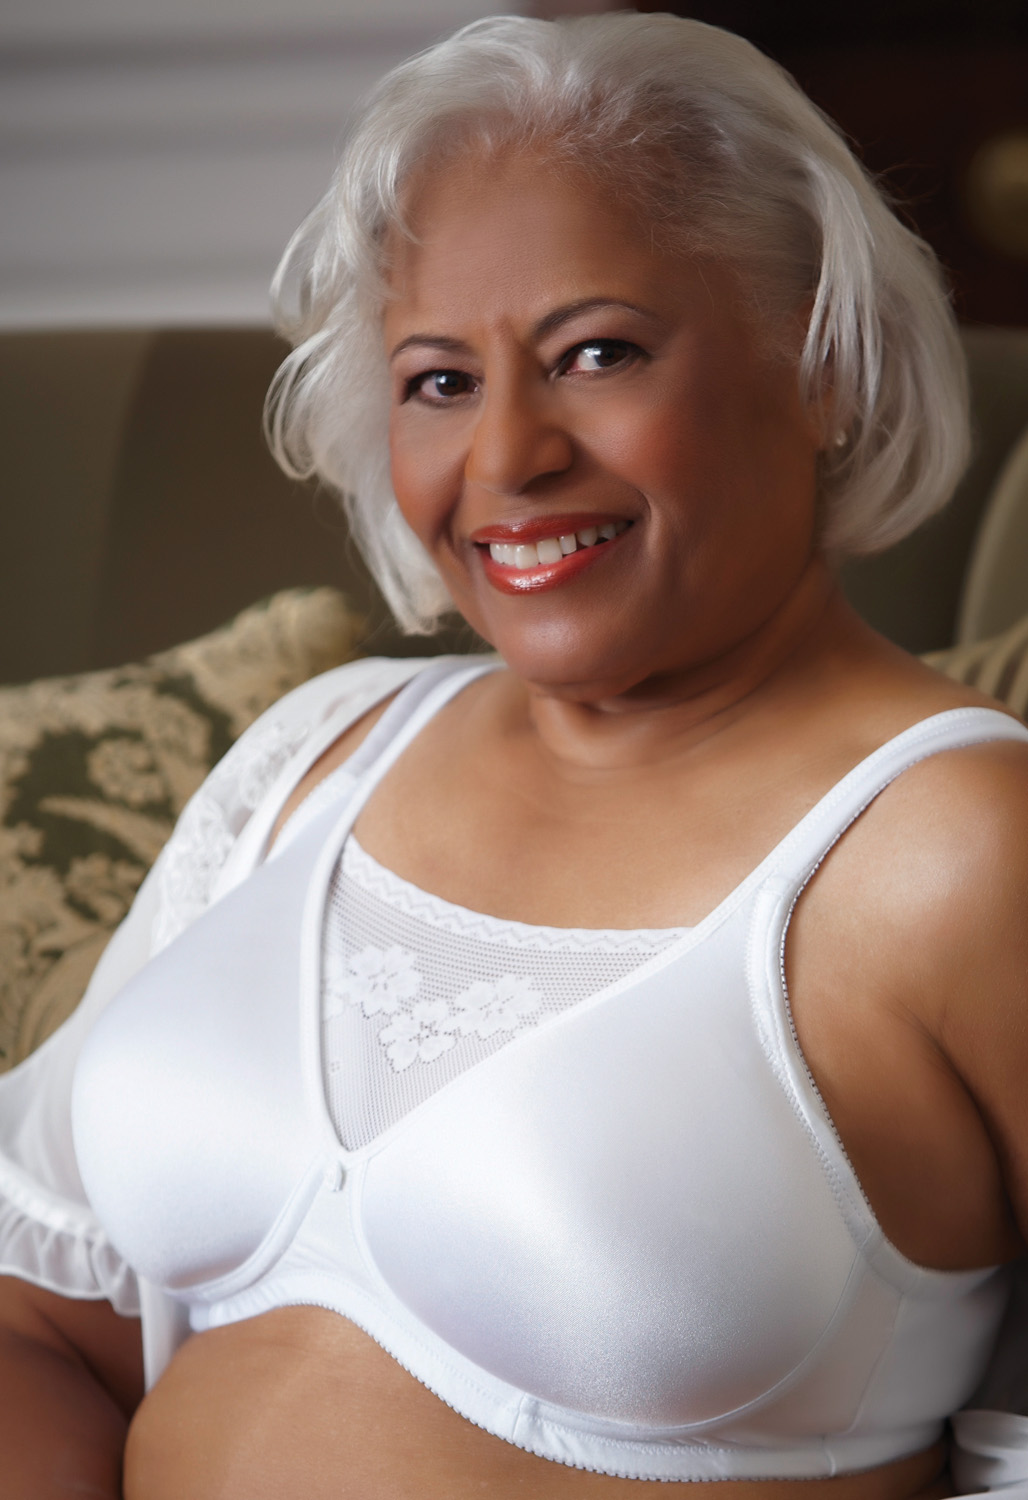 Non Mastectomy Bras and Shapewear - WPH